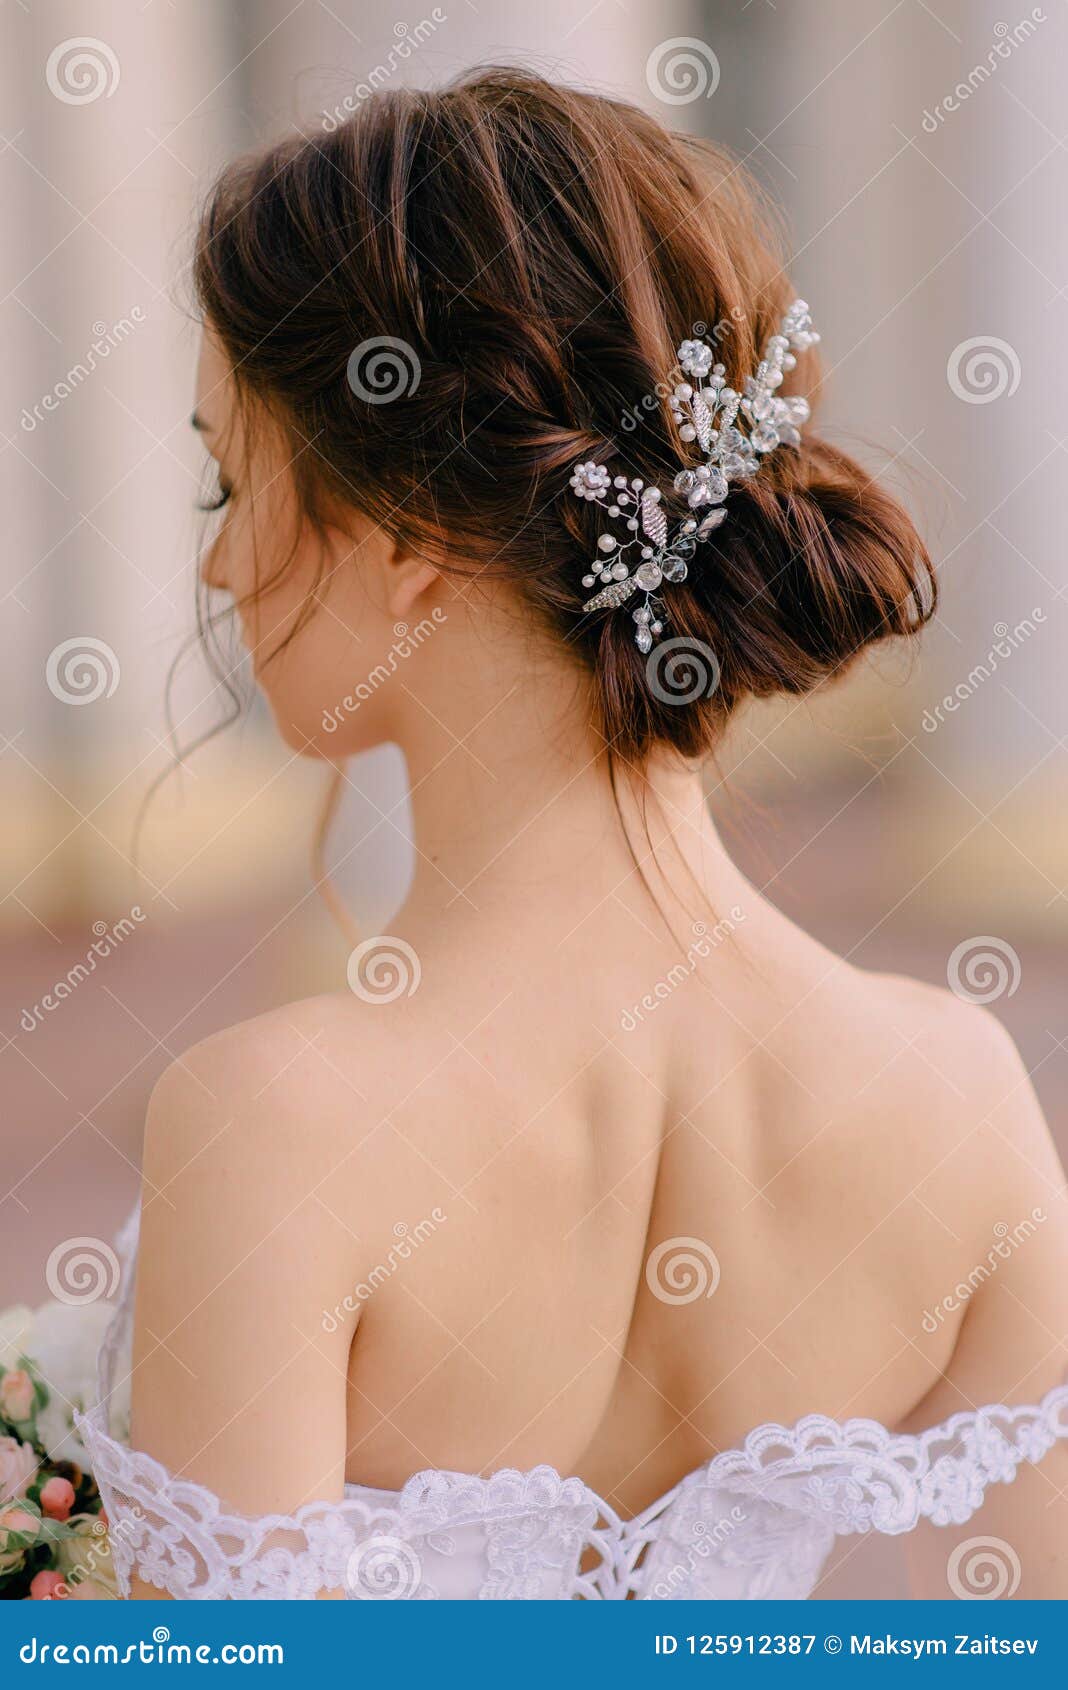 Bride`s wedding hairstyle from behind, close-up